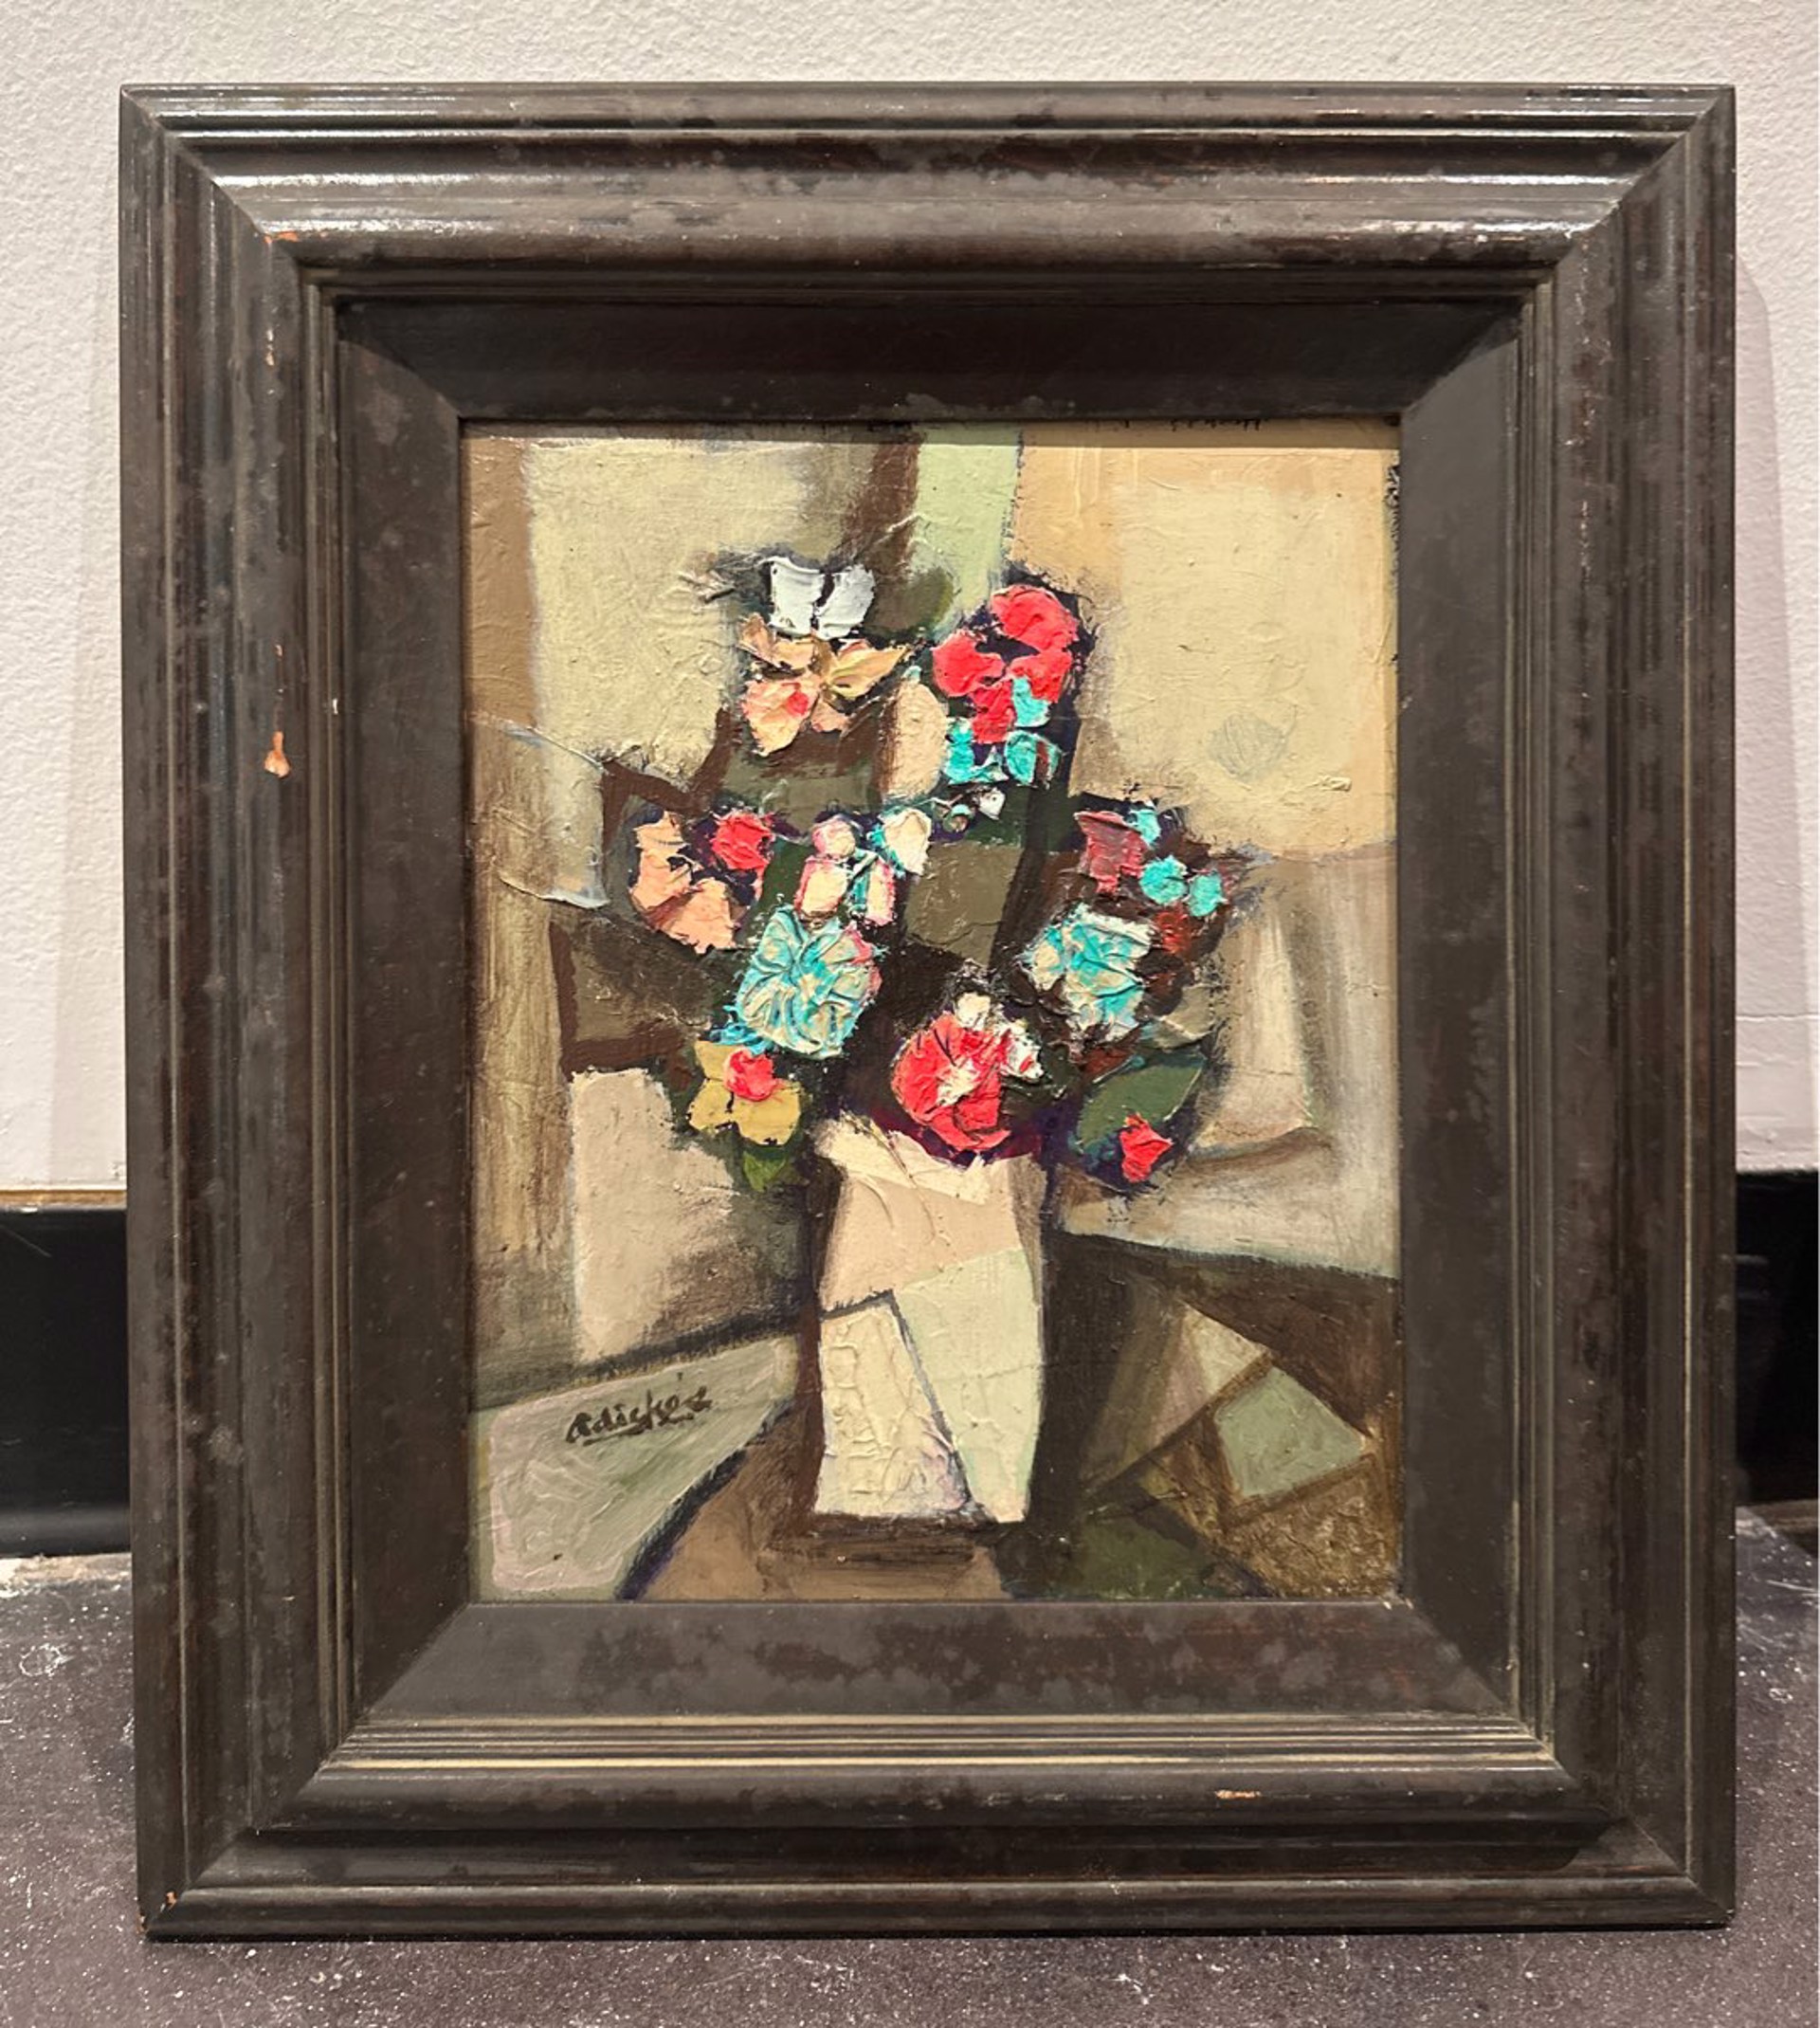 Cubist Vase, Red & Turquoise Flowers by David Adickes